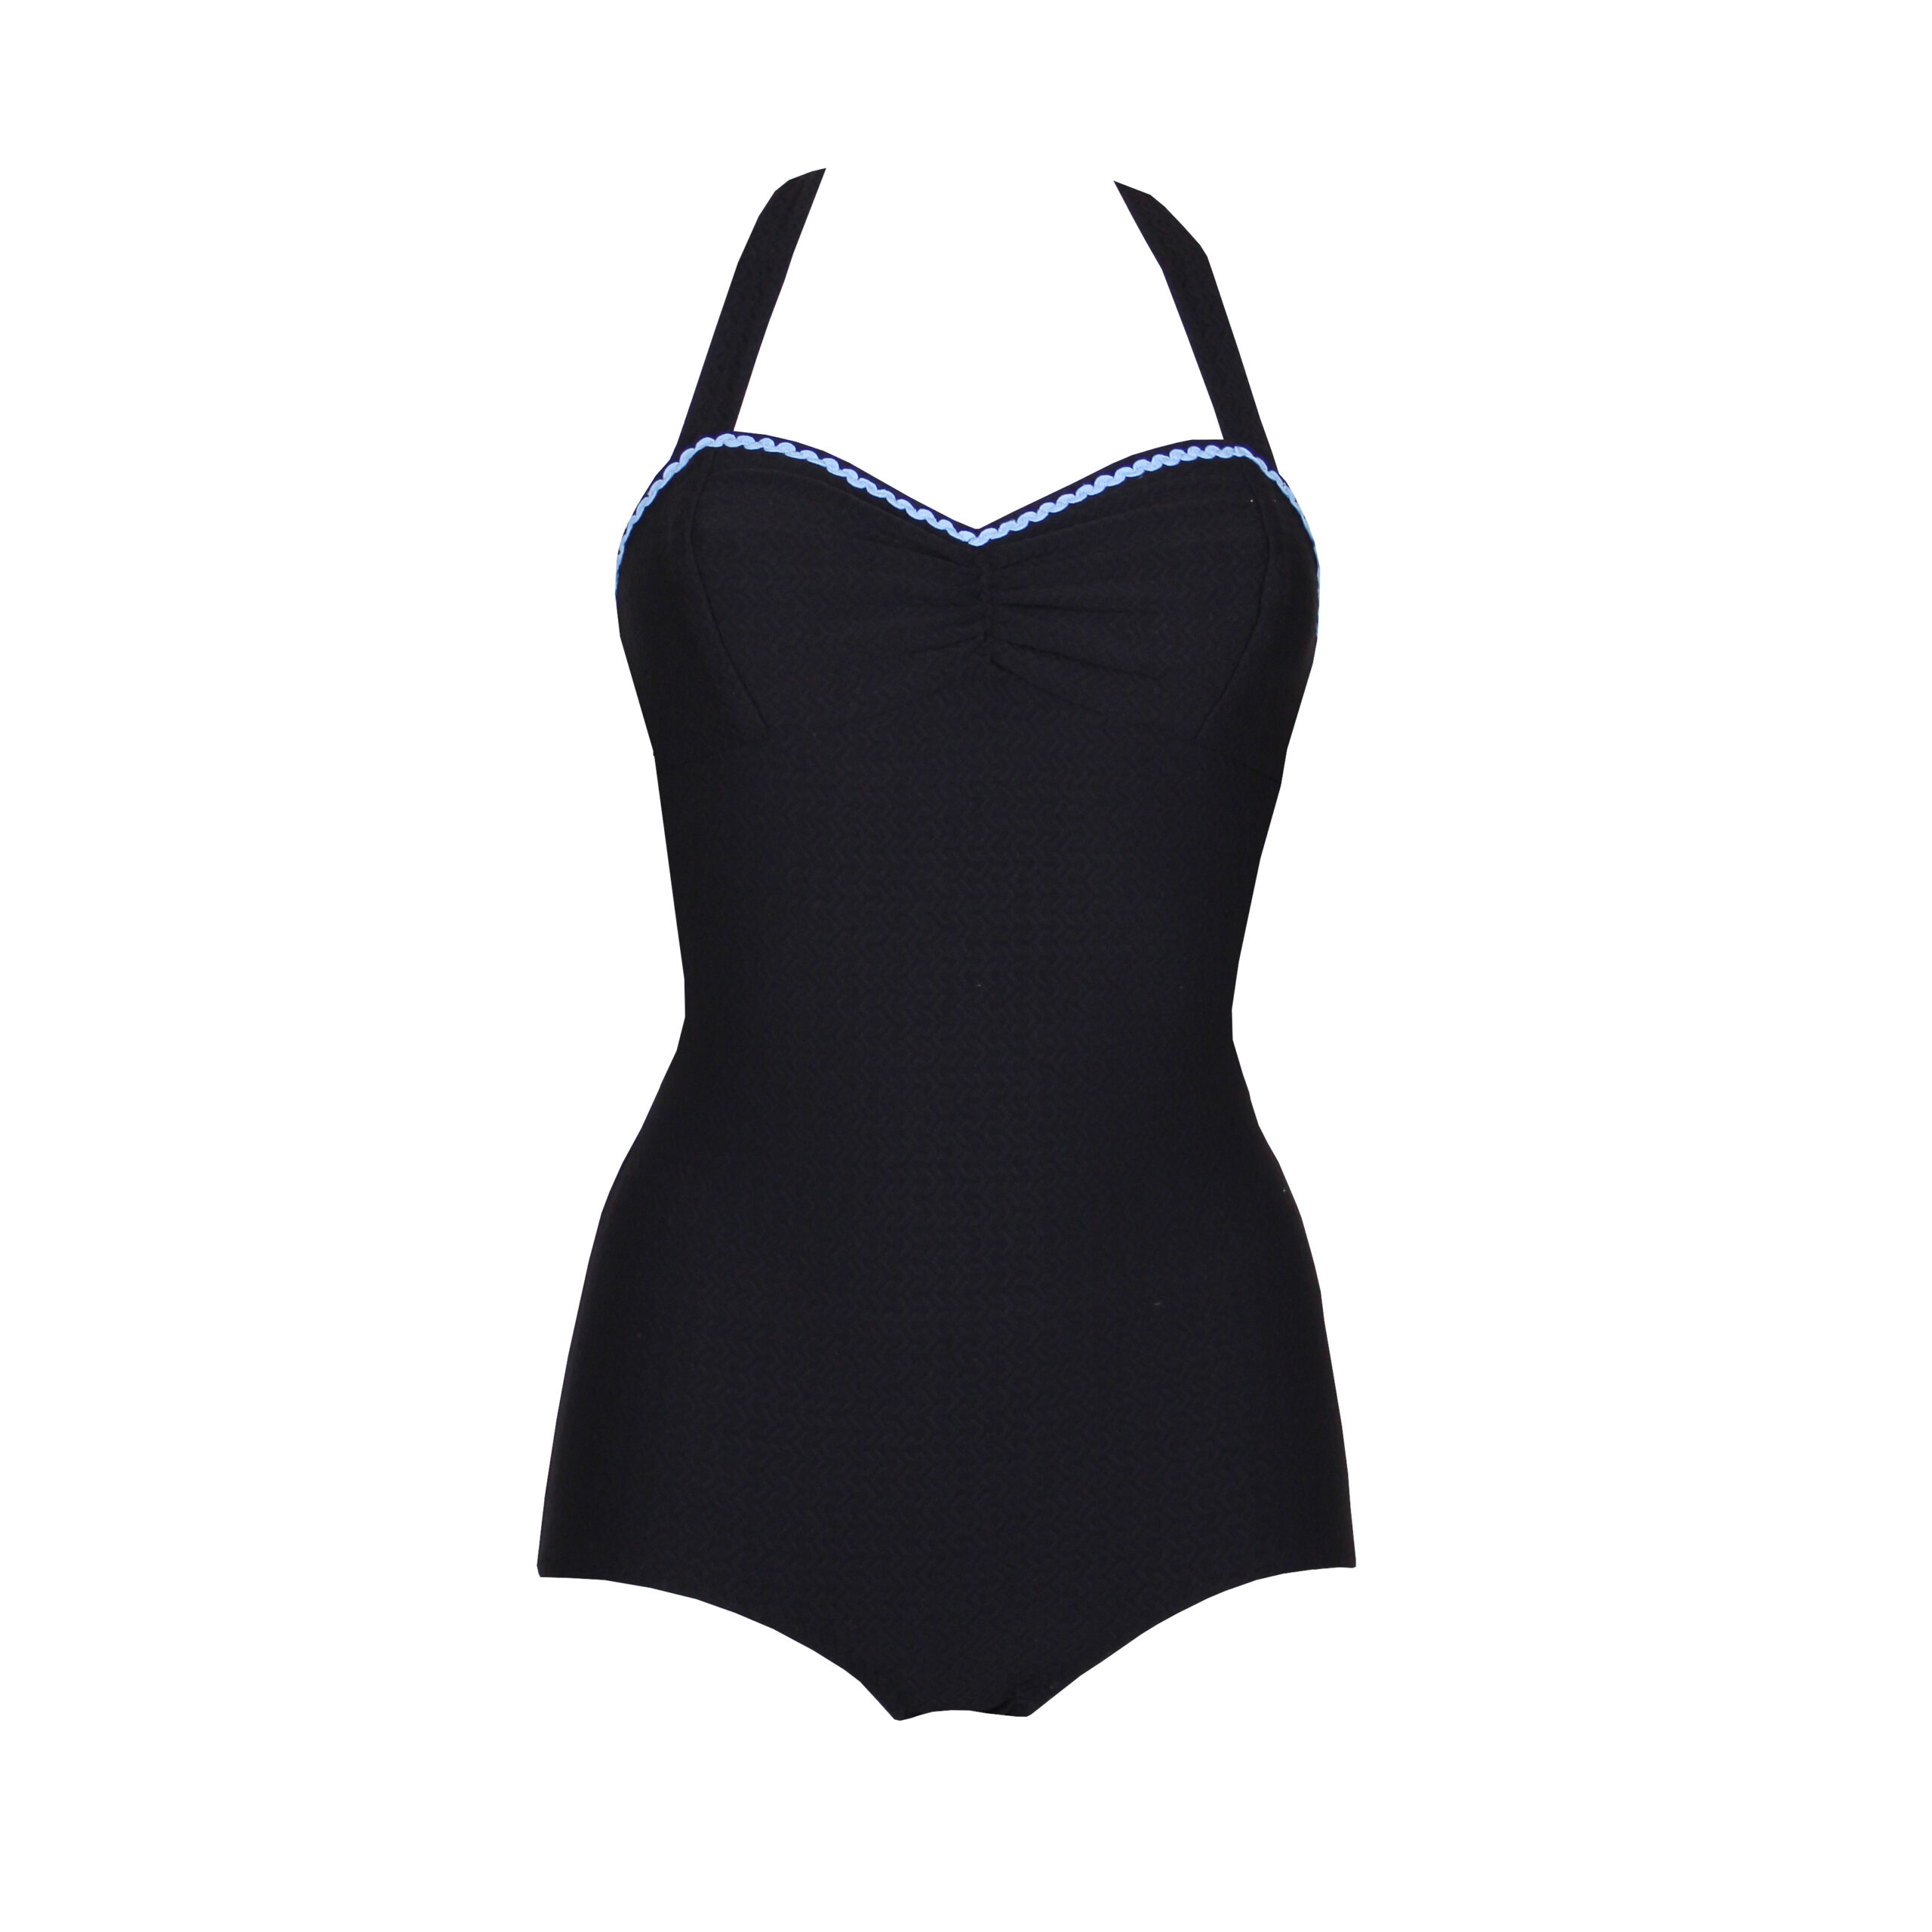 “Saint Malo” Swimsuit | Fifi Chachnil - Official website